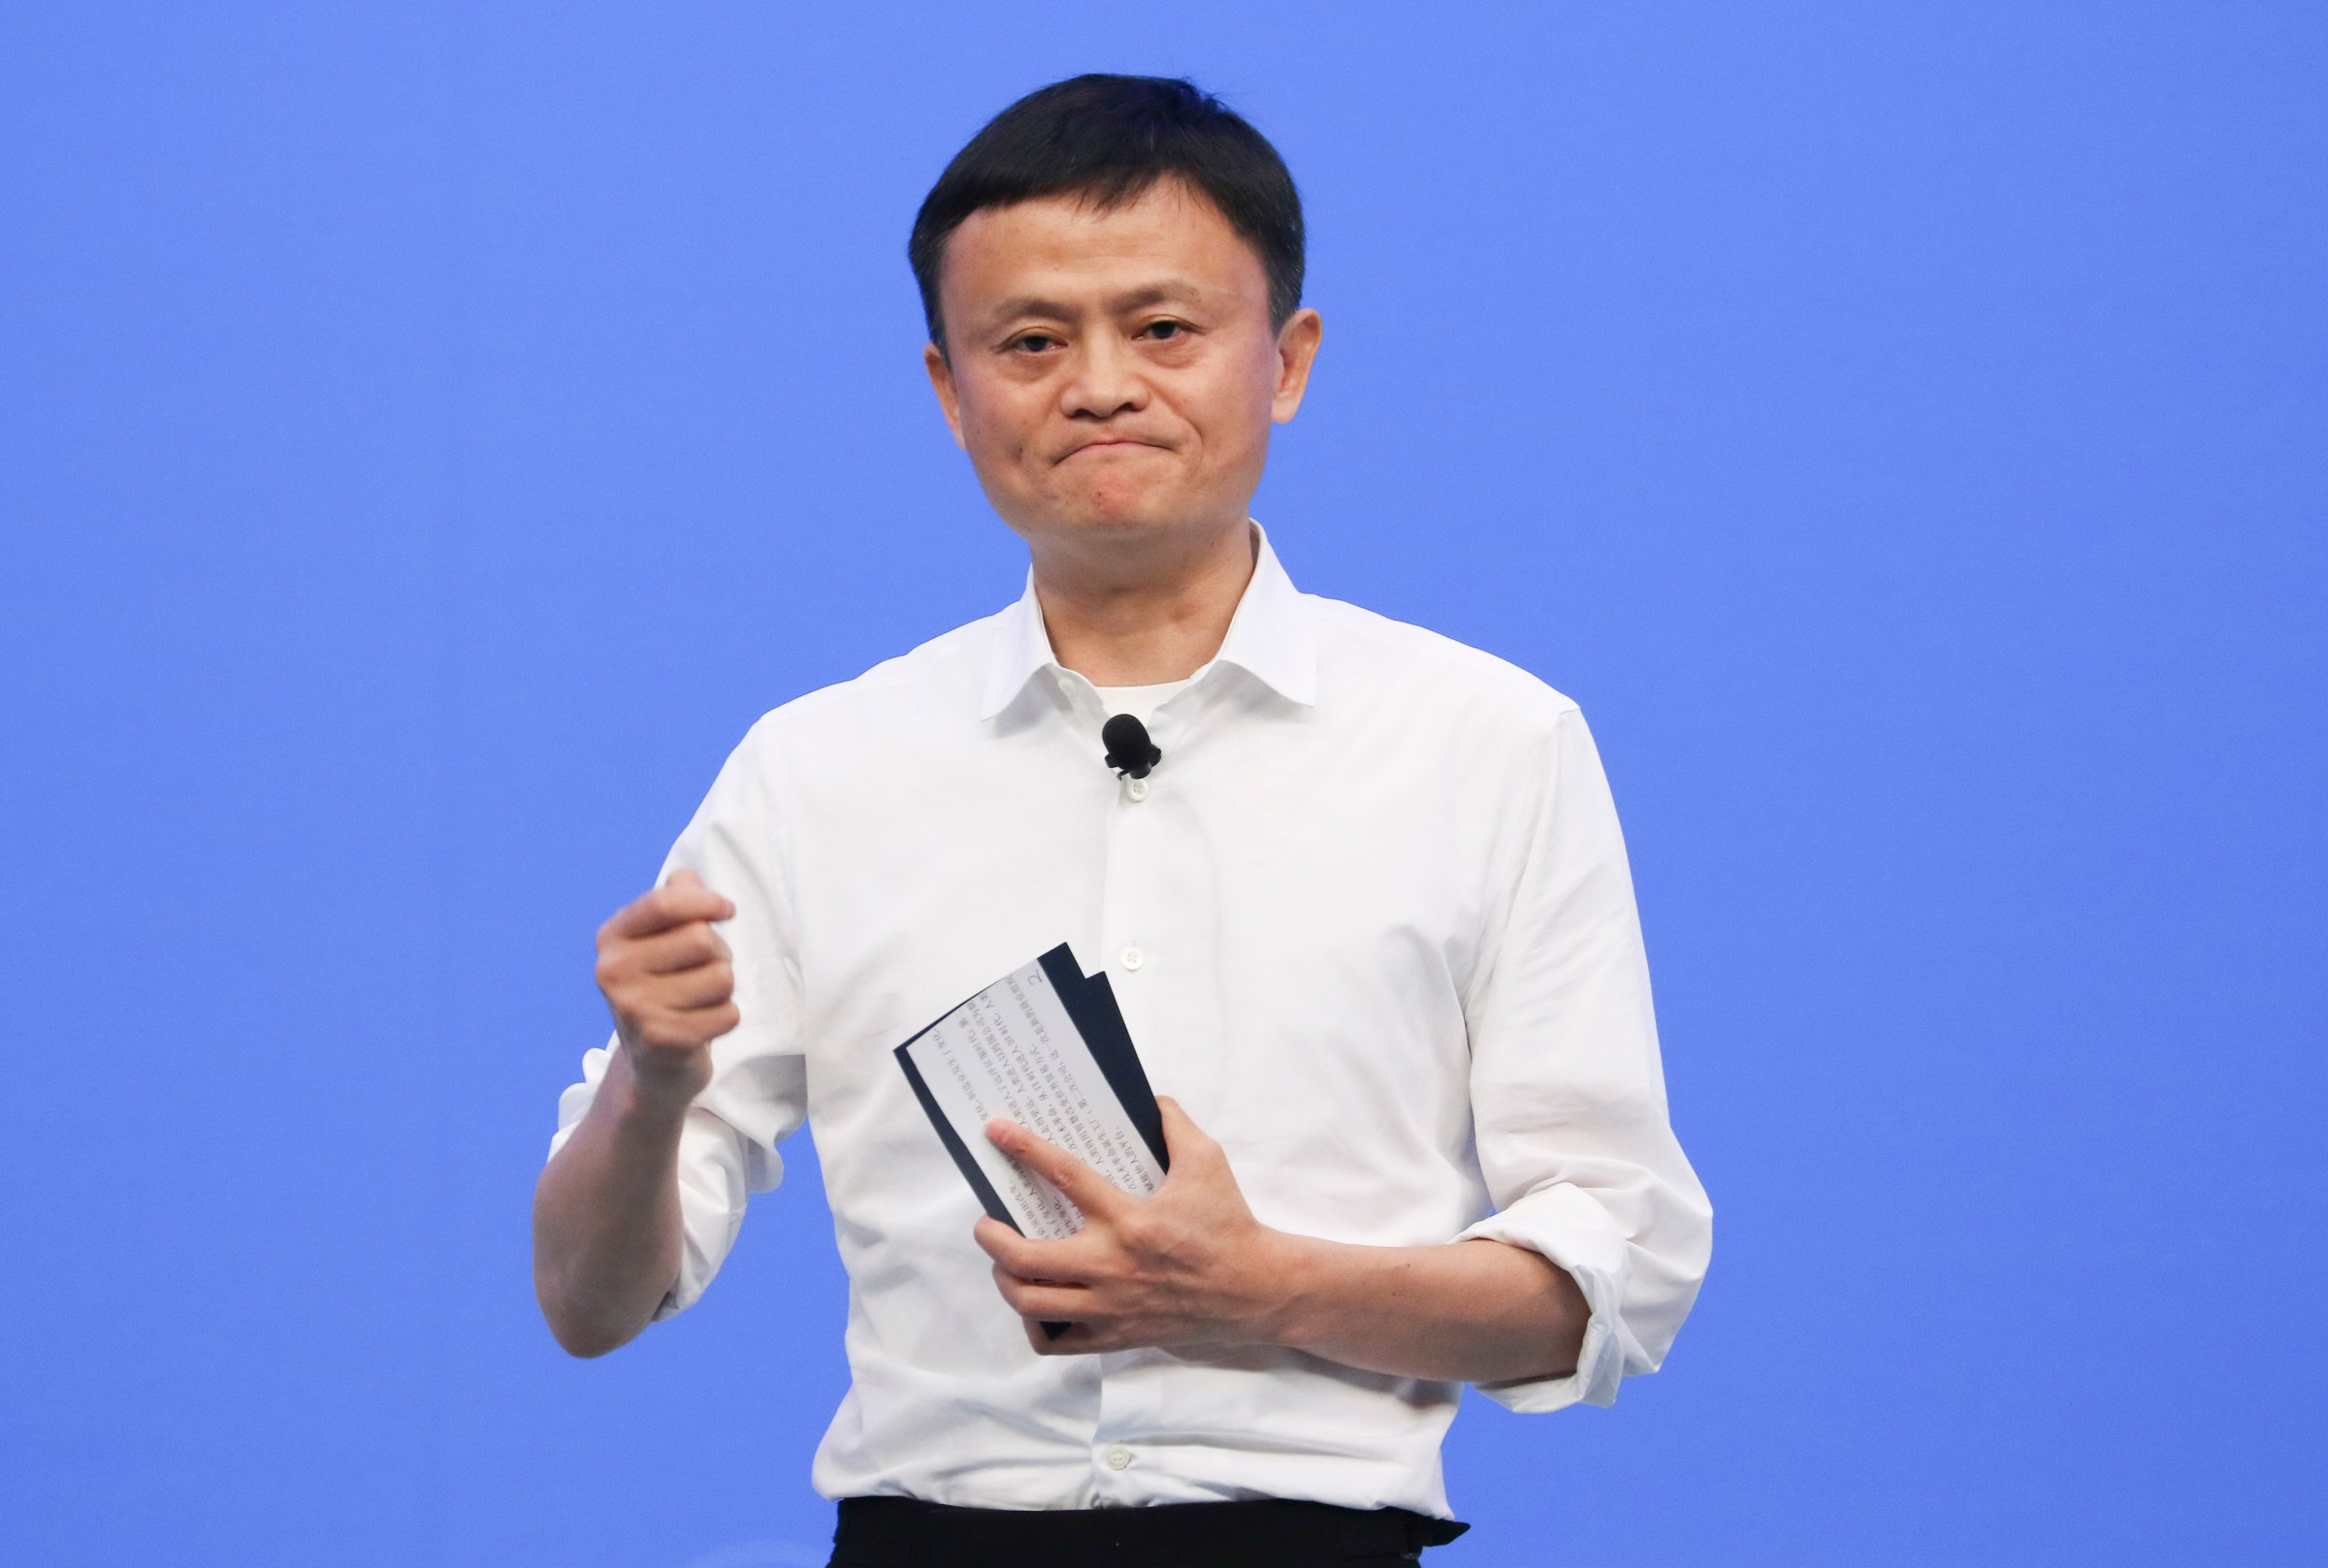 QIONGHAI, CHINA - MARCH 23: (CHINA OUT) Alibaba Group Chairman Jack Ma speaks during the Boao Forum For Asia Annual Conference on March 23, 2016 in Qionghai, Hainan Province of China. Jack Ma firstly proposed on the forum that there should be building an Electronic World Trade Platform (eWTP) to guide the minor enterprises, women and young entrepreneurs into global market. (Photo by VCG)***_***